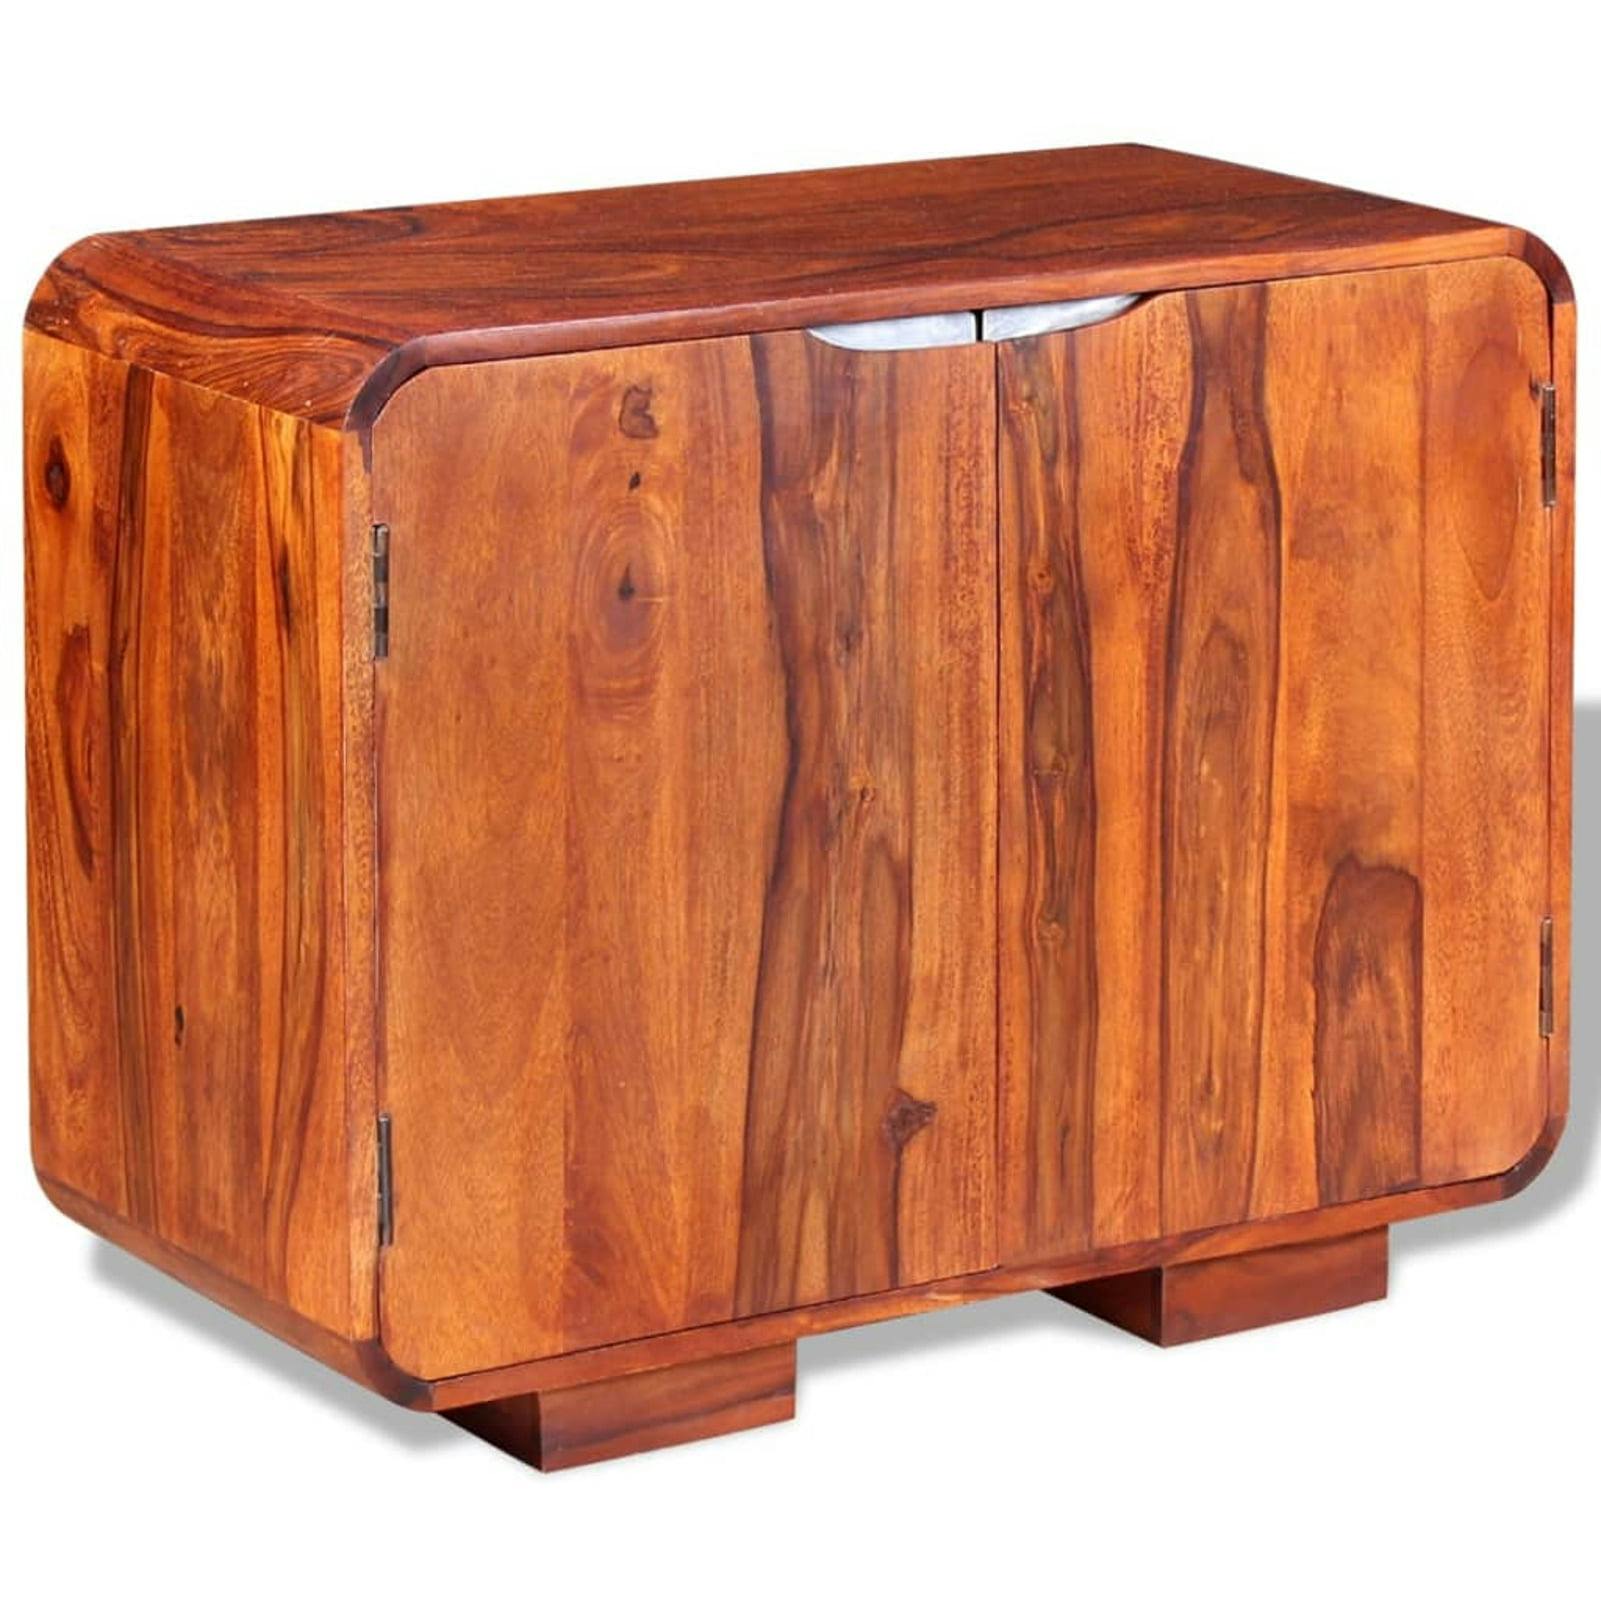 Sheesham Wood Honey Finish Sideboard with Dual Compartments 29.5"x13.8"x23.6"